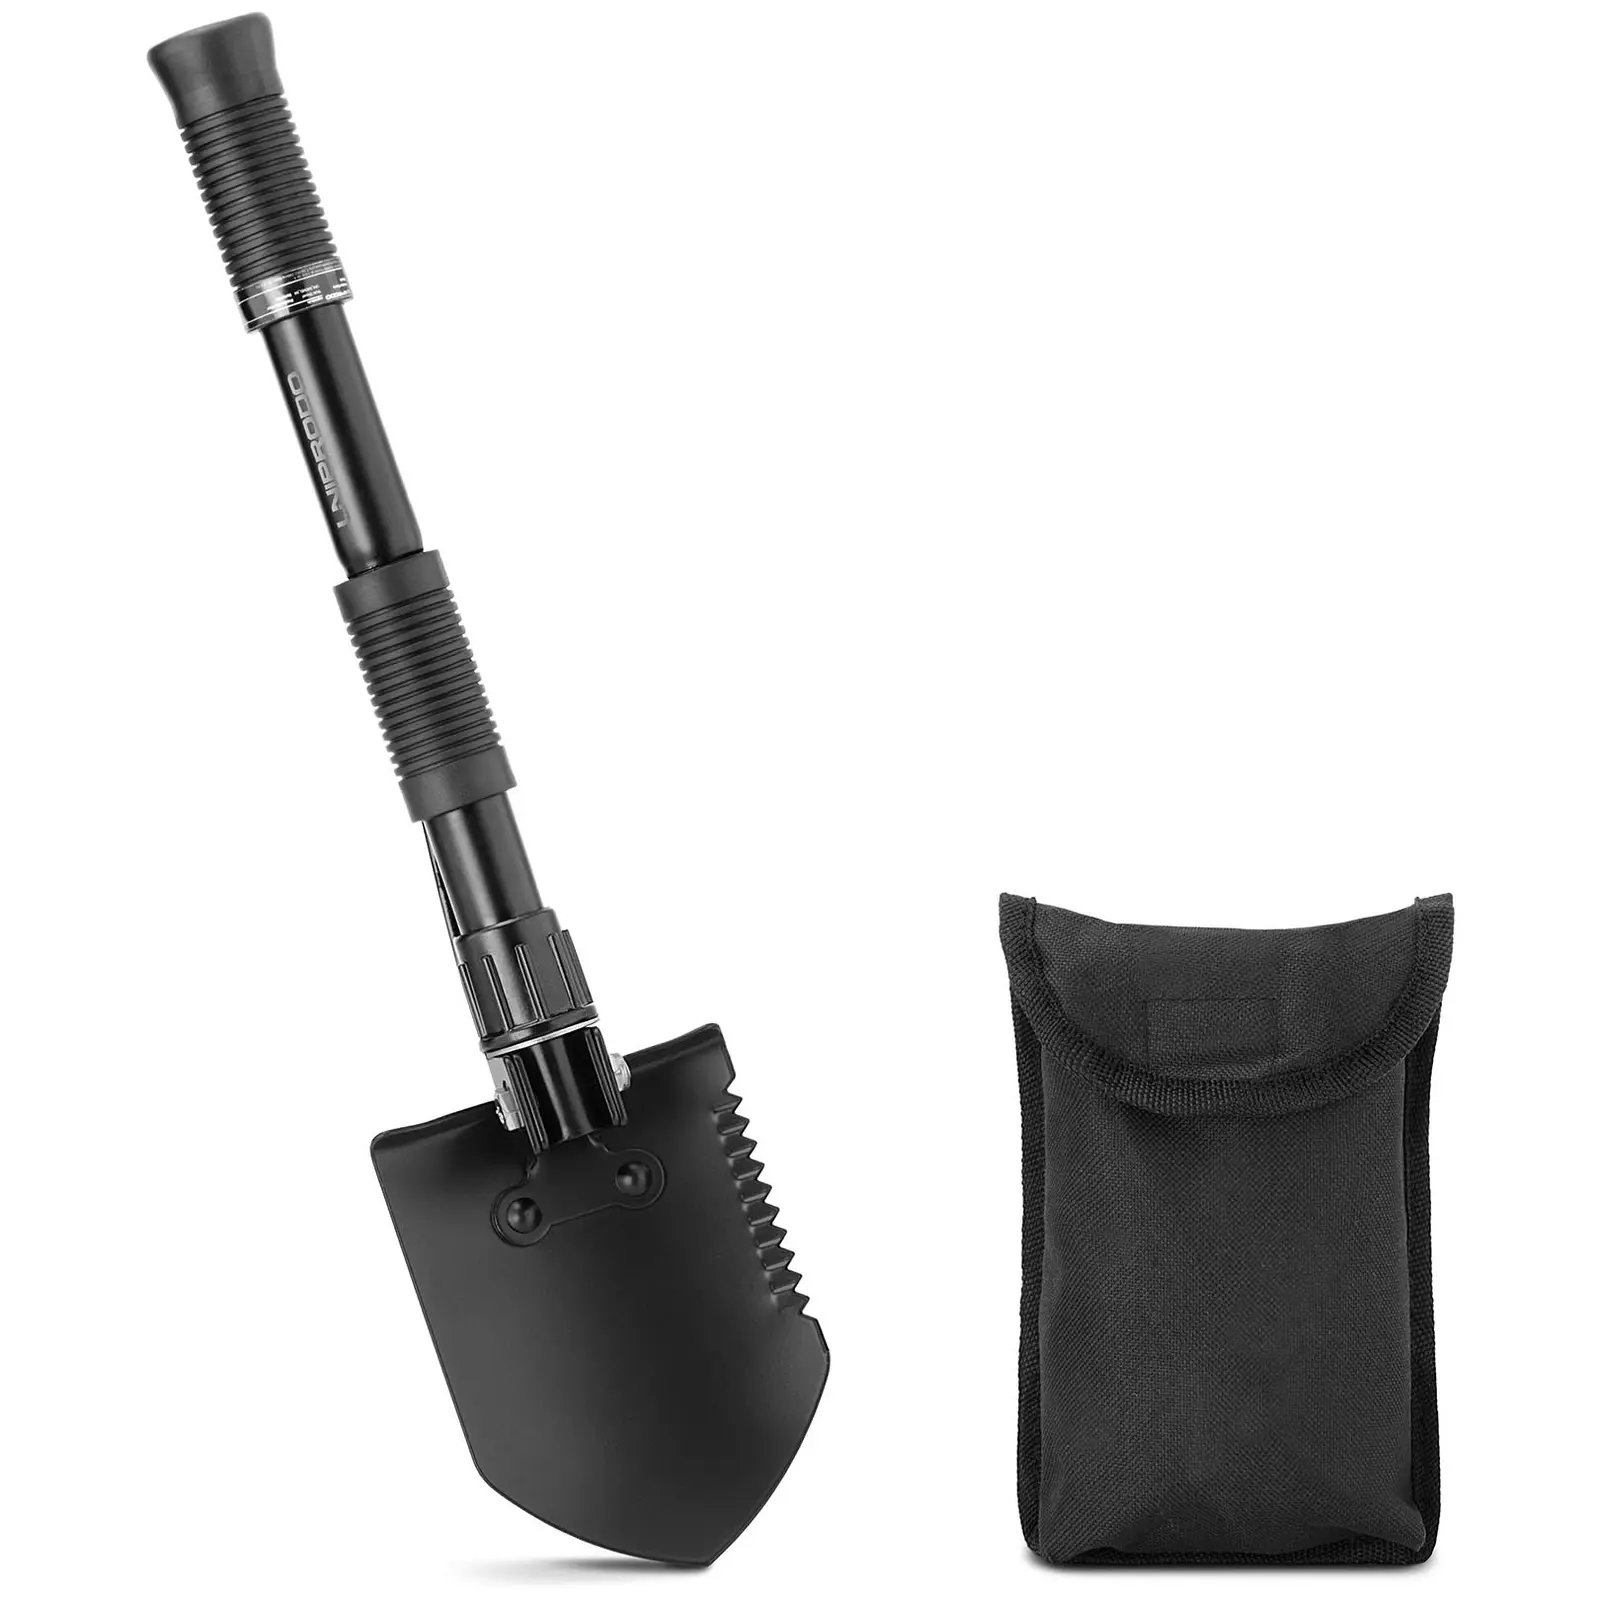 Folding Shovel - with pick and saw